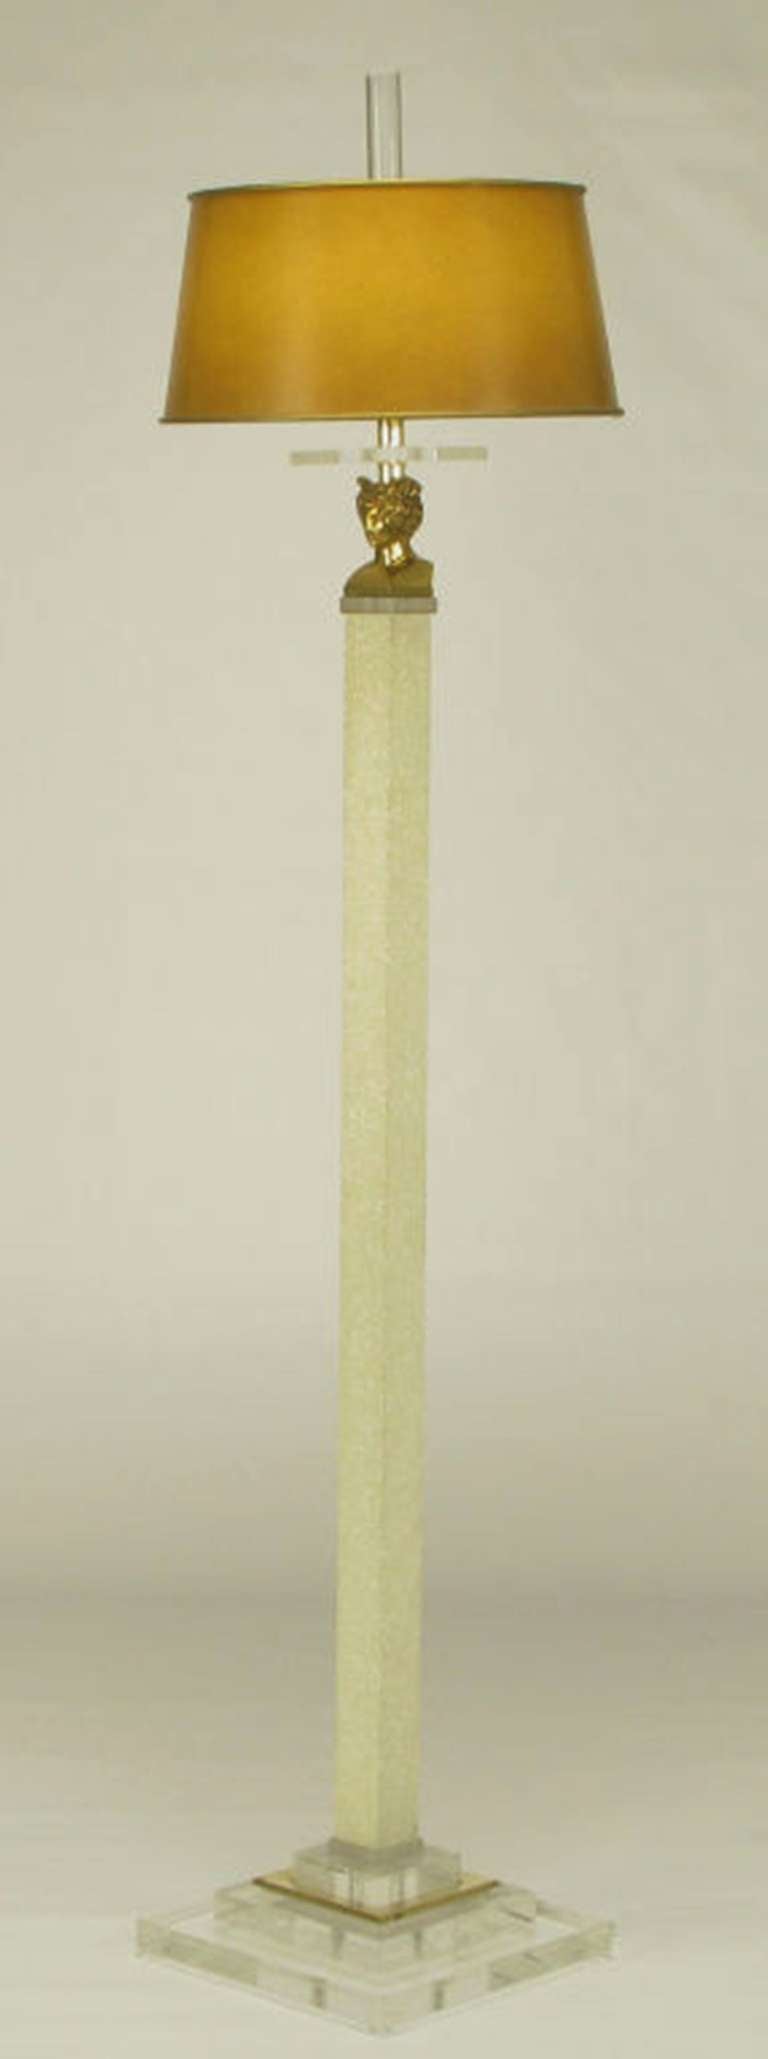 American Empire Revival Floor Lamp In Lucite & Brass By Bauer Lamp